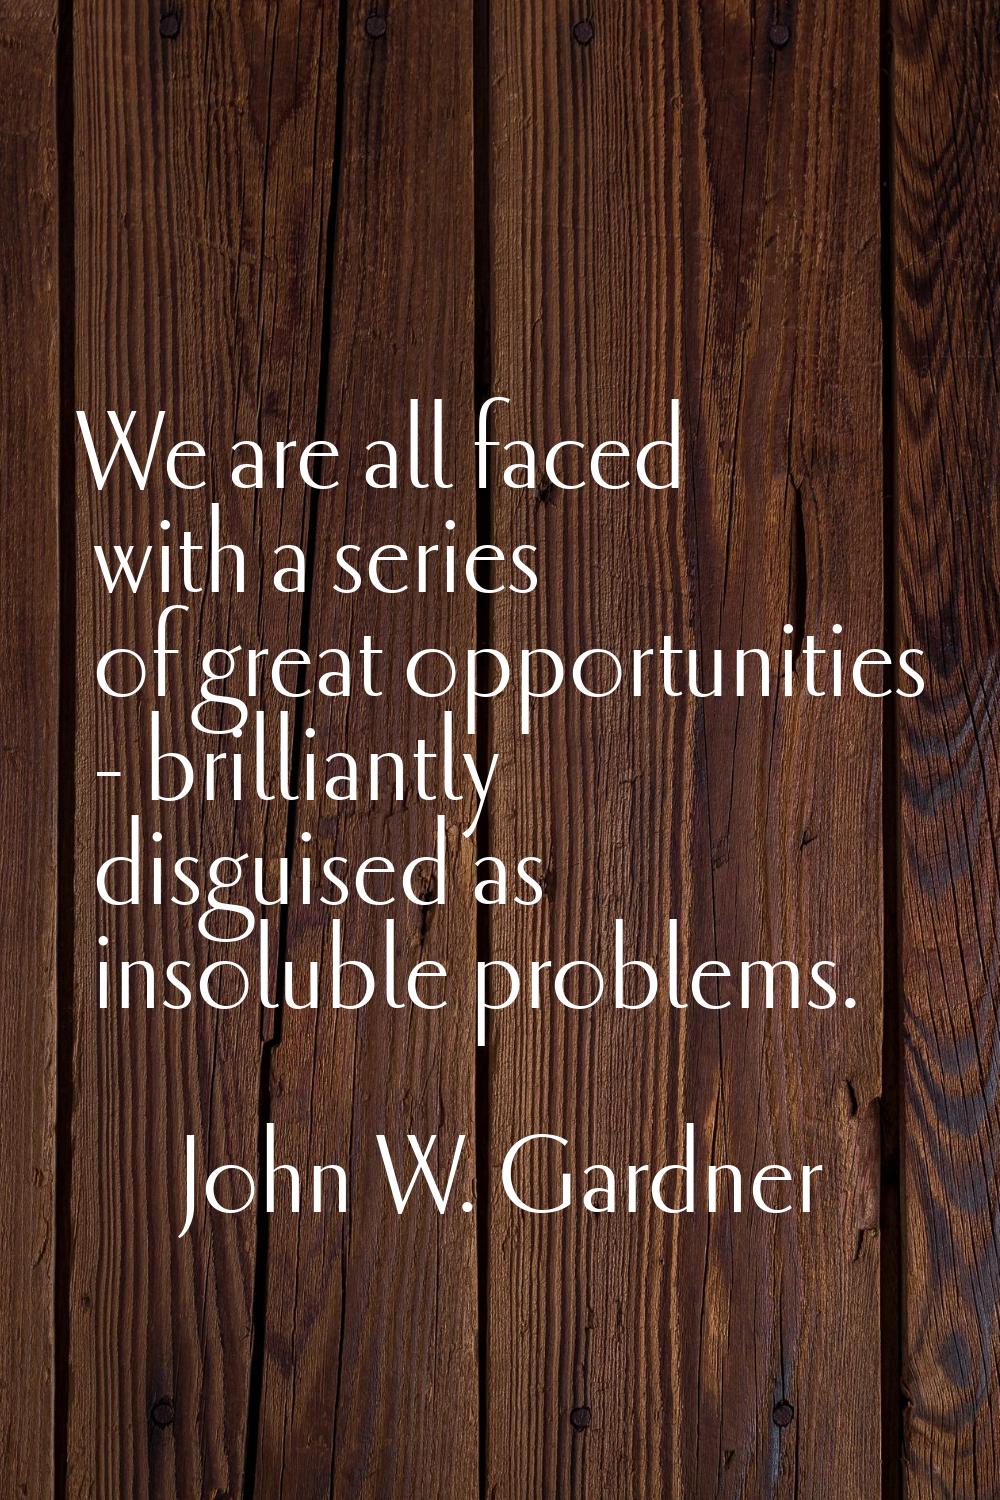 We are all faced with a series of great opportunities - brilliantly disguised as insoluble problems